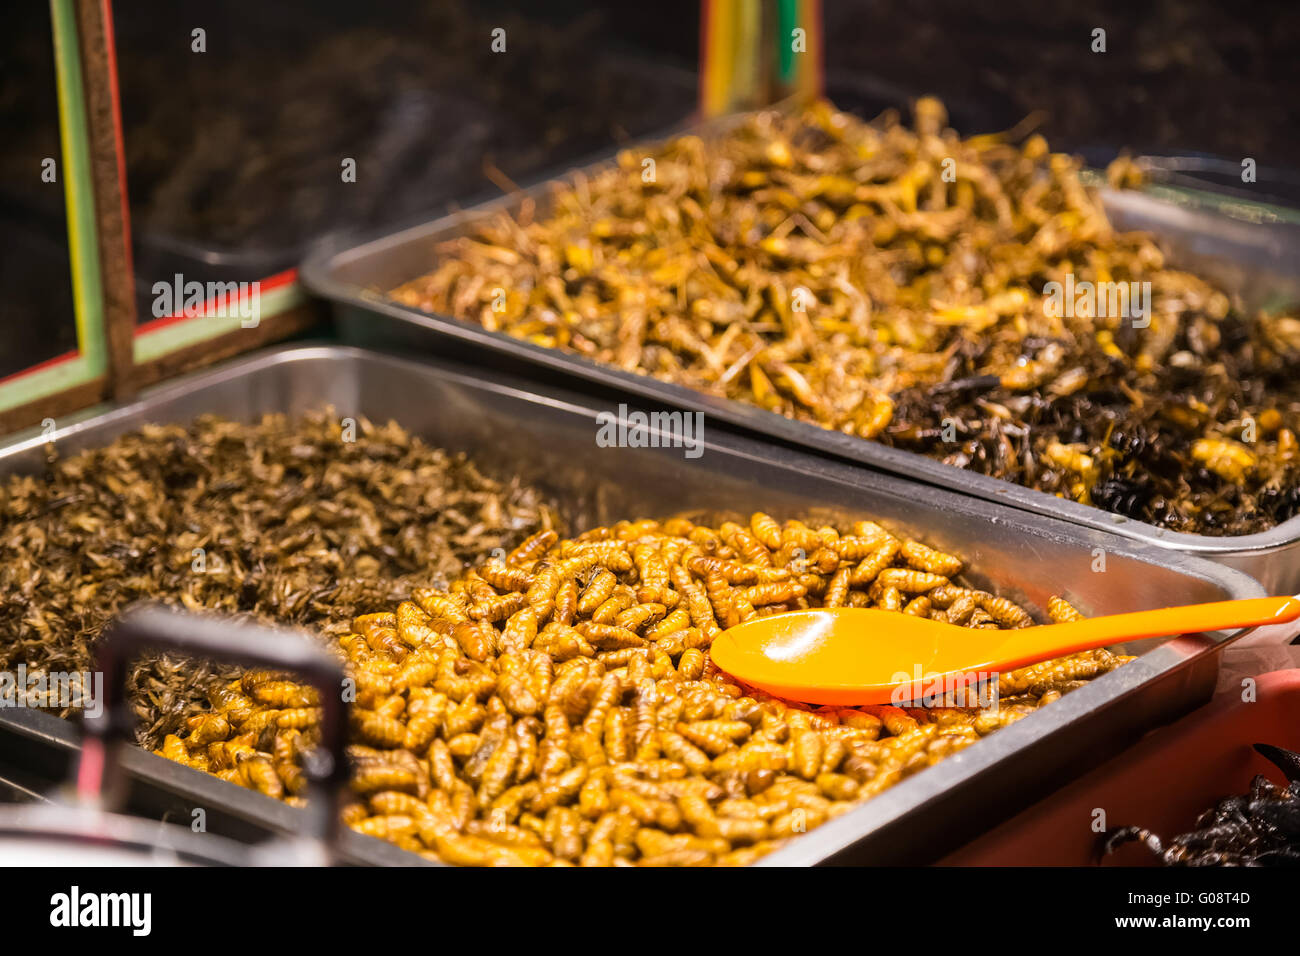 Fried insects like bugs, grasshoppers, larvae, caterpillars and scorpions are sold as food on the steet of Pattaya, Thailand Stock Photo